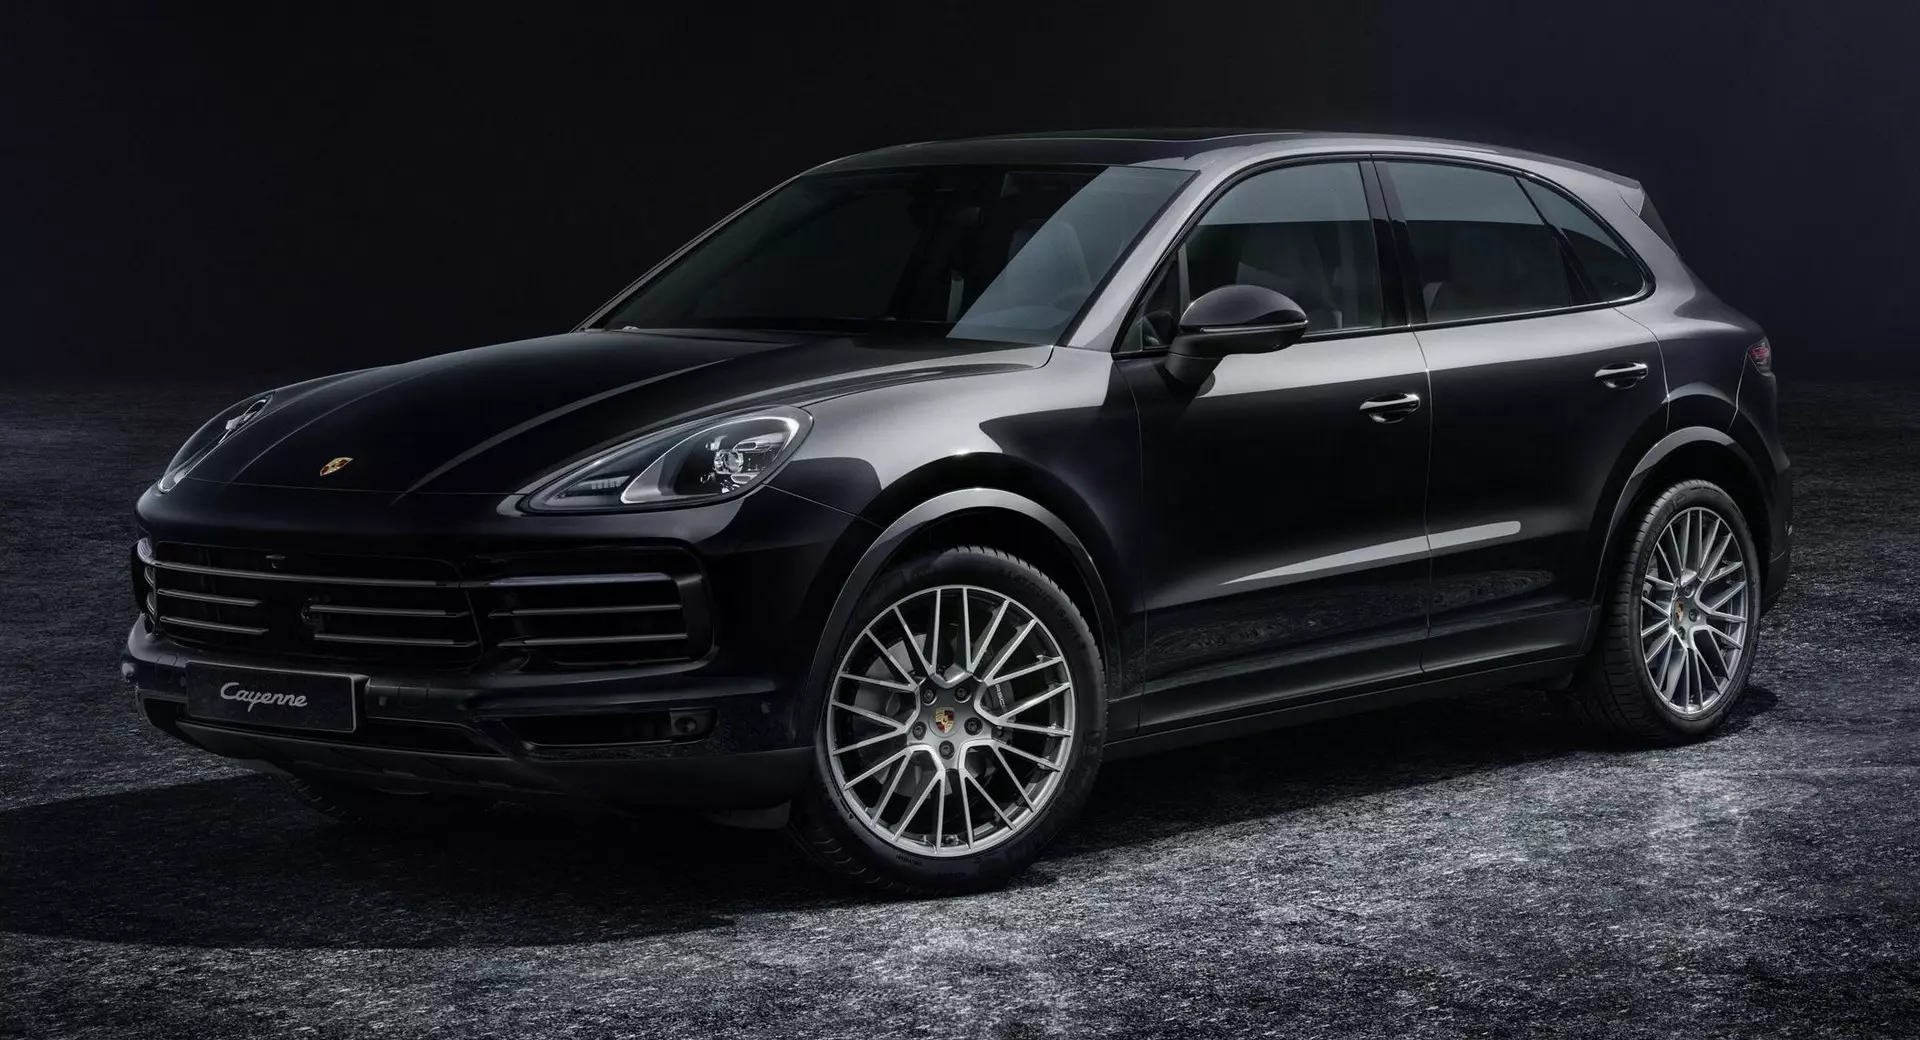 A special version for the Cayenne family: Porsche Cayenne Platinum Edition